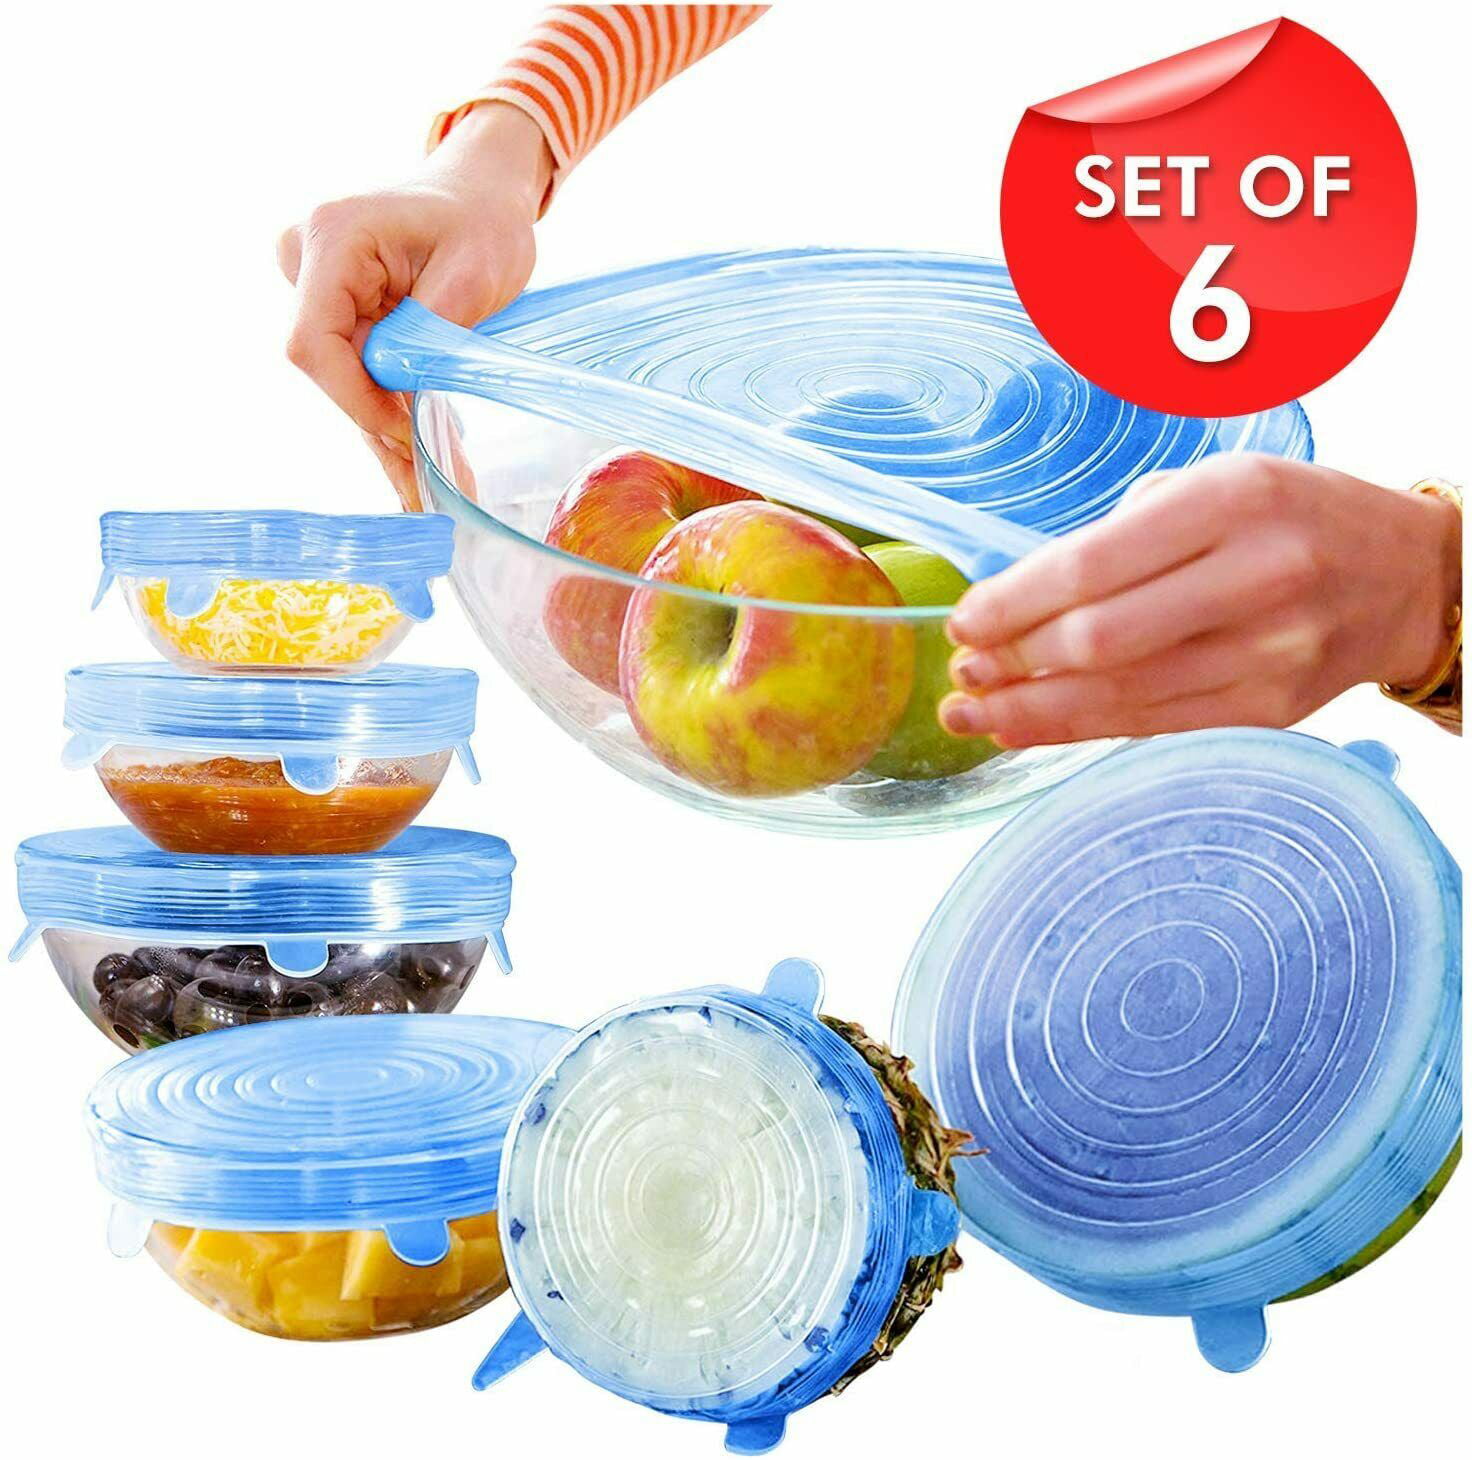 6PCS Stretch Reusable Silicone Food Preservation Cover Sealing Lids Bowl Wraps 